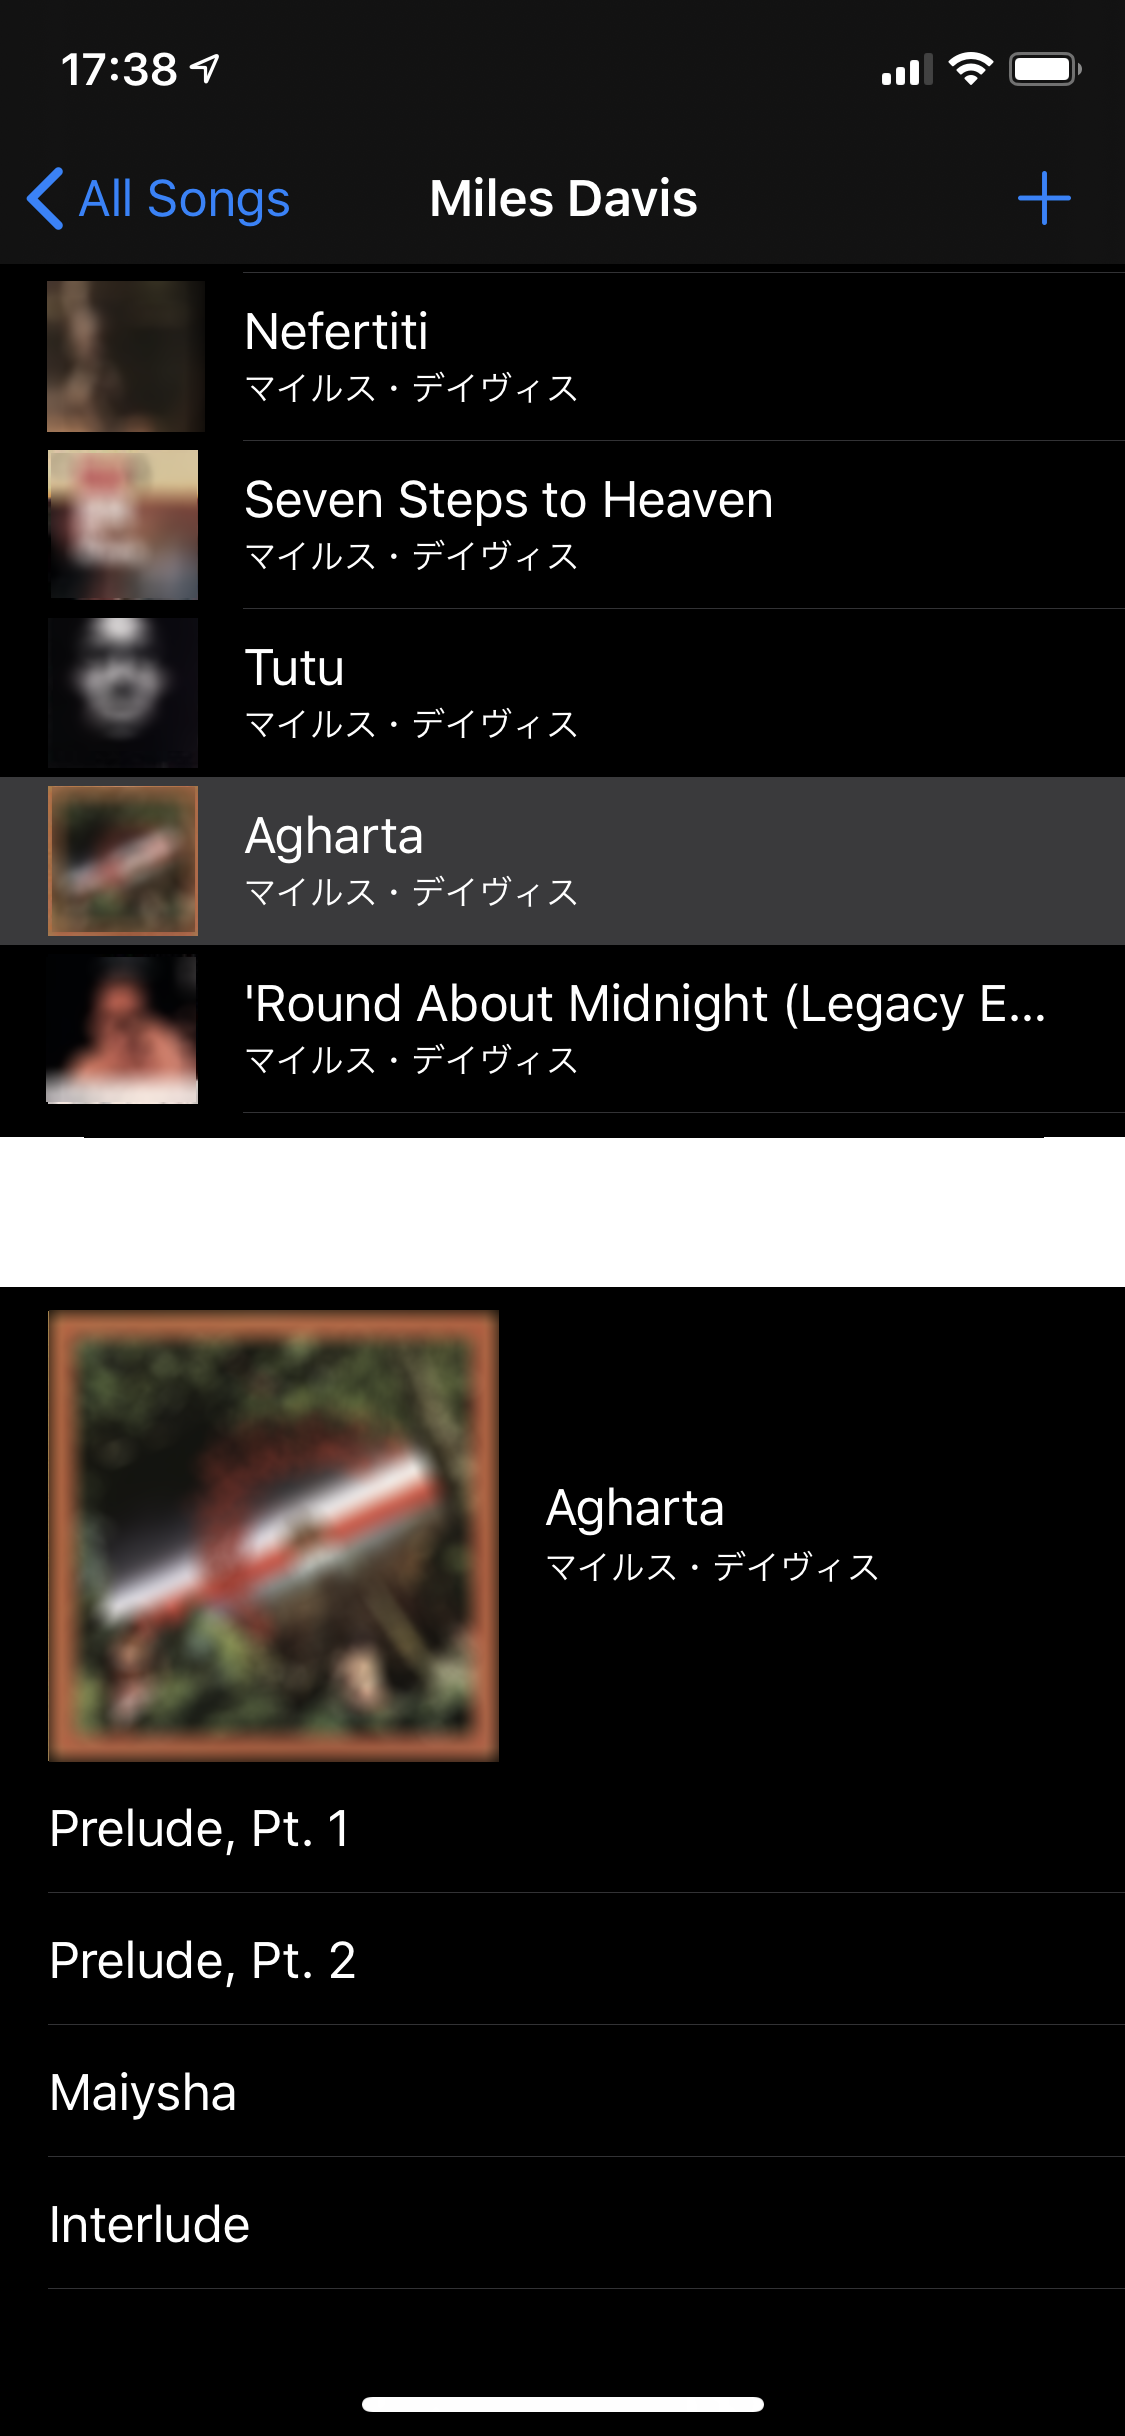 PlayingAlbums for iOS